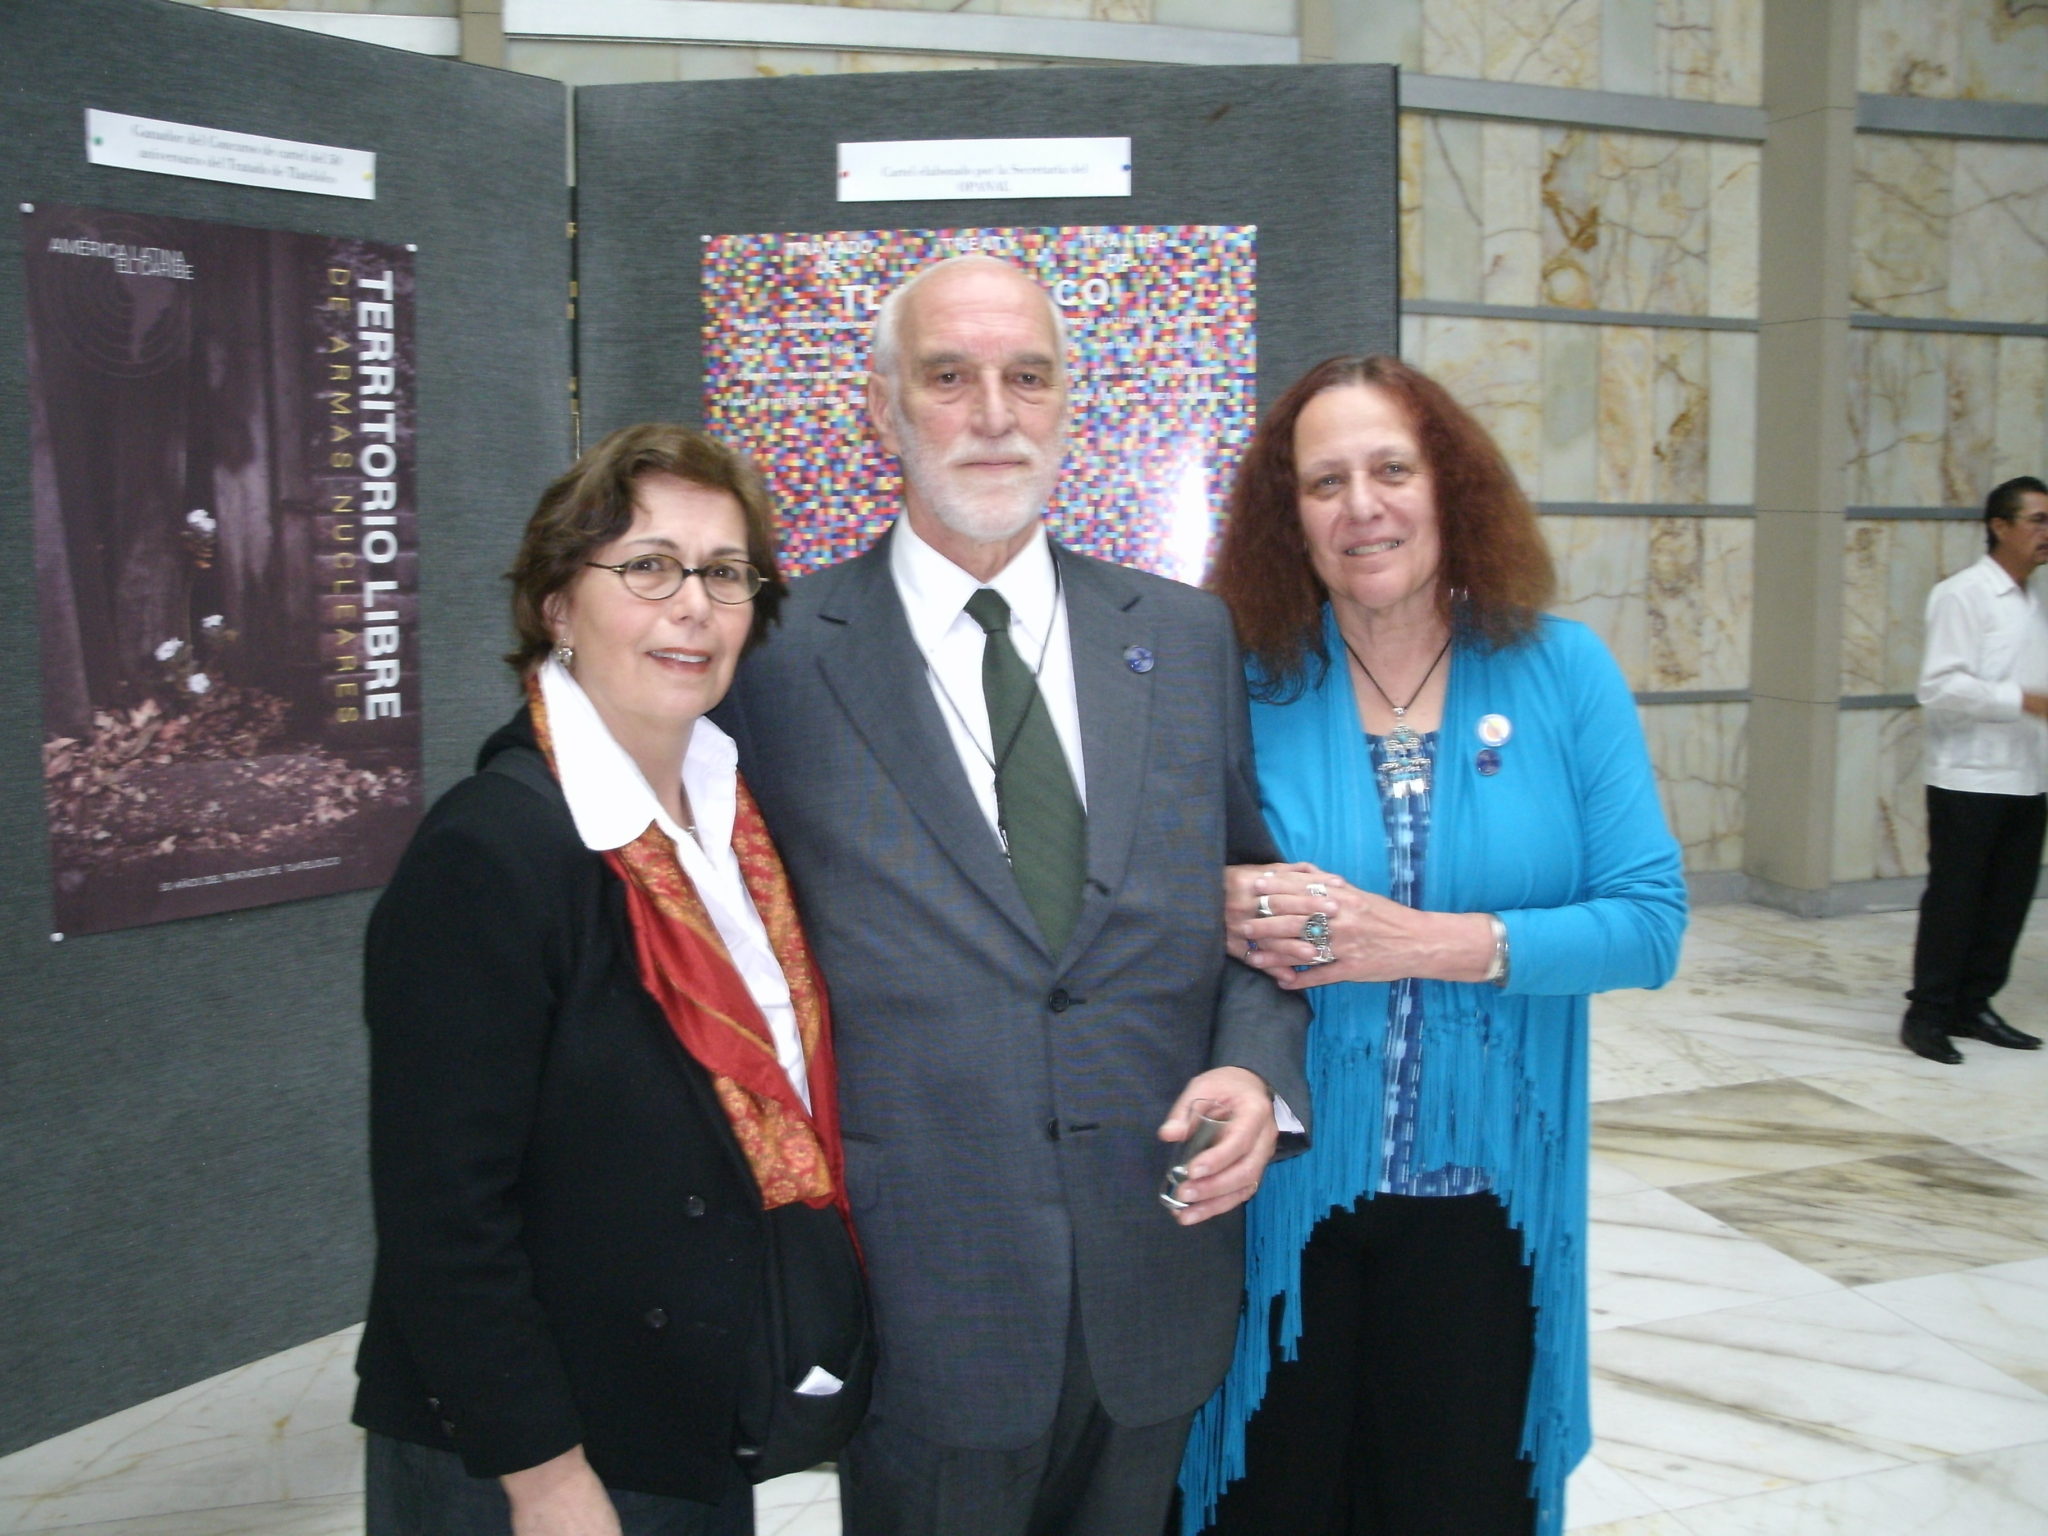 left to right: Jackie Cabasso, Western States Legal Foundation (WSLF) executive director and United for Peace and Justice co-convener, Ambassador Luiz Filipe de Macedo Soares, Secretary-General of OPANAL, Marcia Campos, WSLF Board member